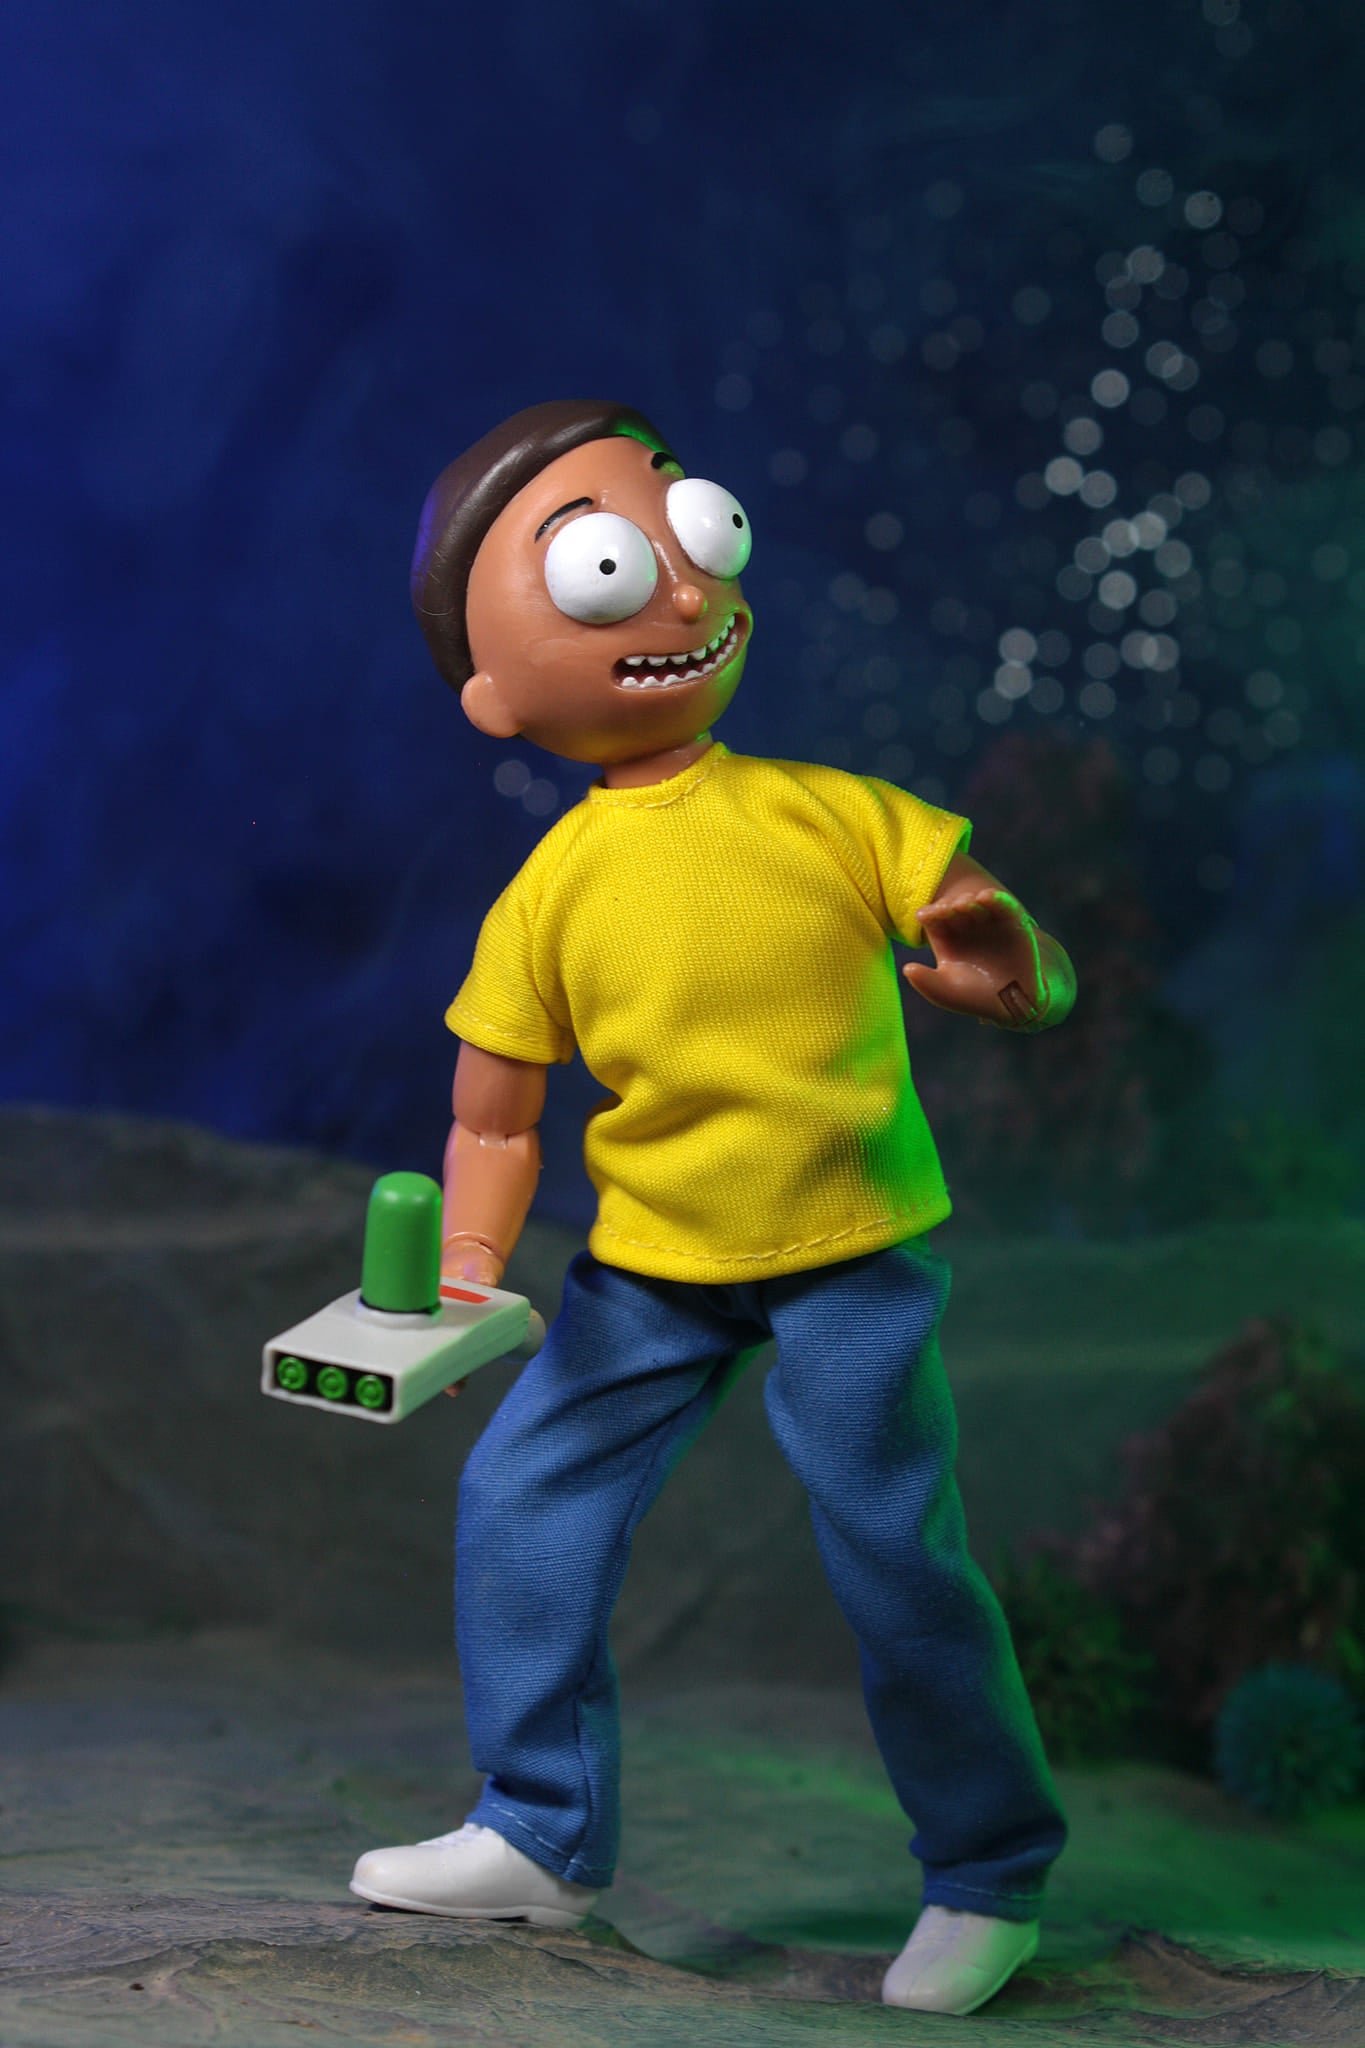 Mego SciFi Wave 17 - Morty Smith (Rick and Morty) 8" Action Figure